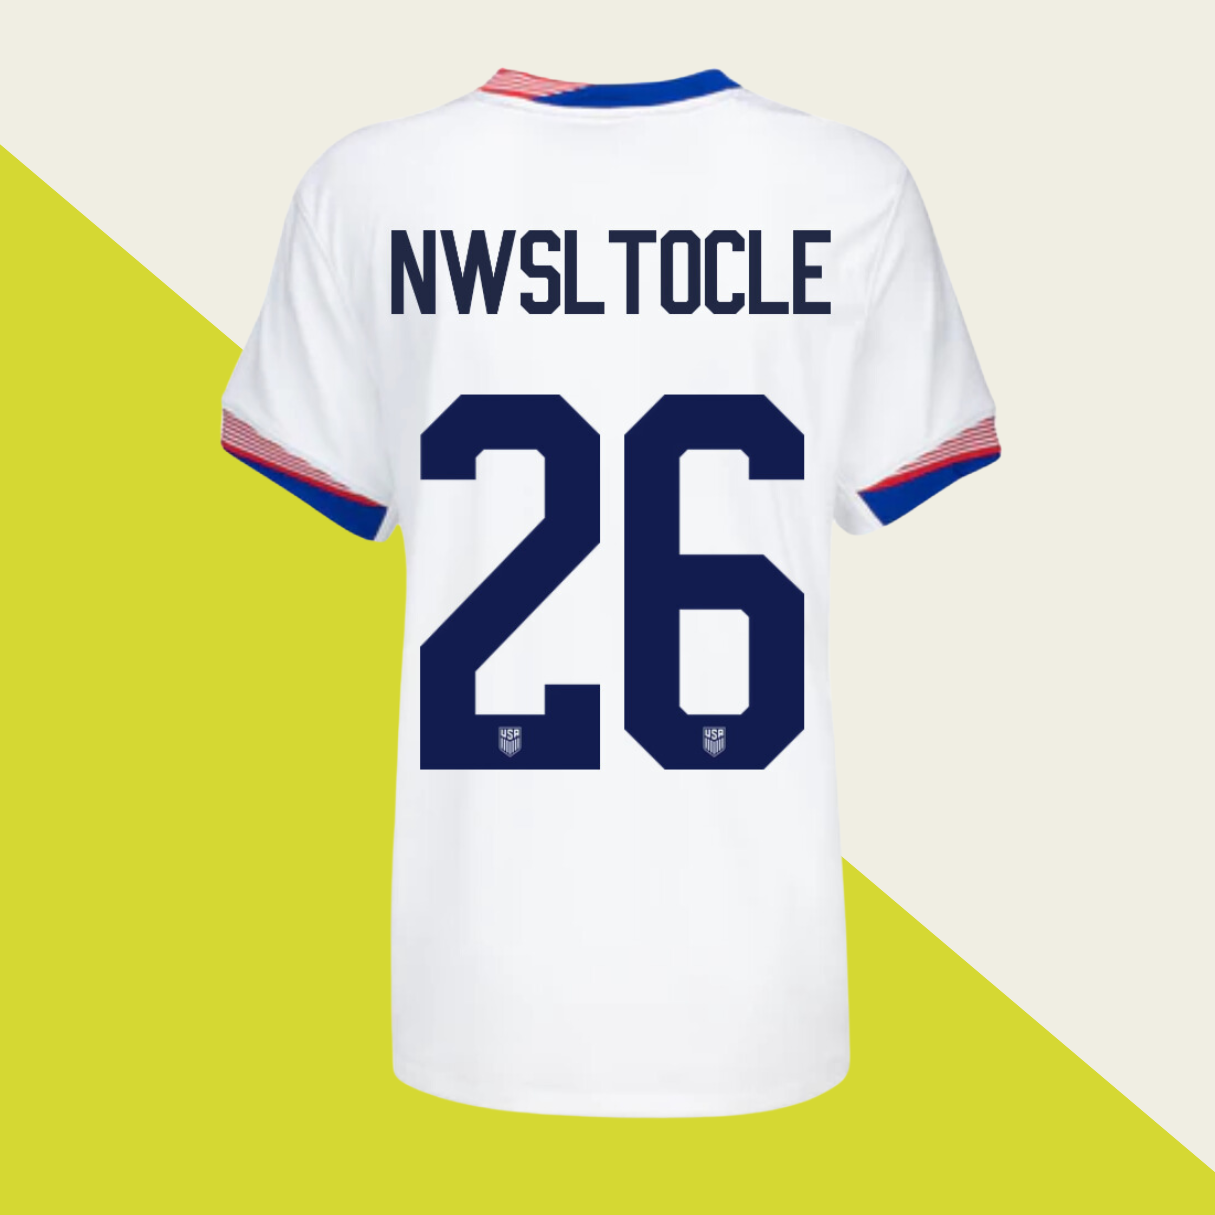 NWSL to CLE USWNT Jersey